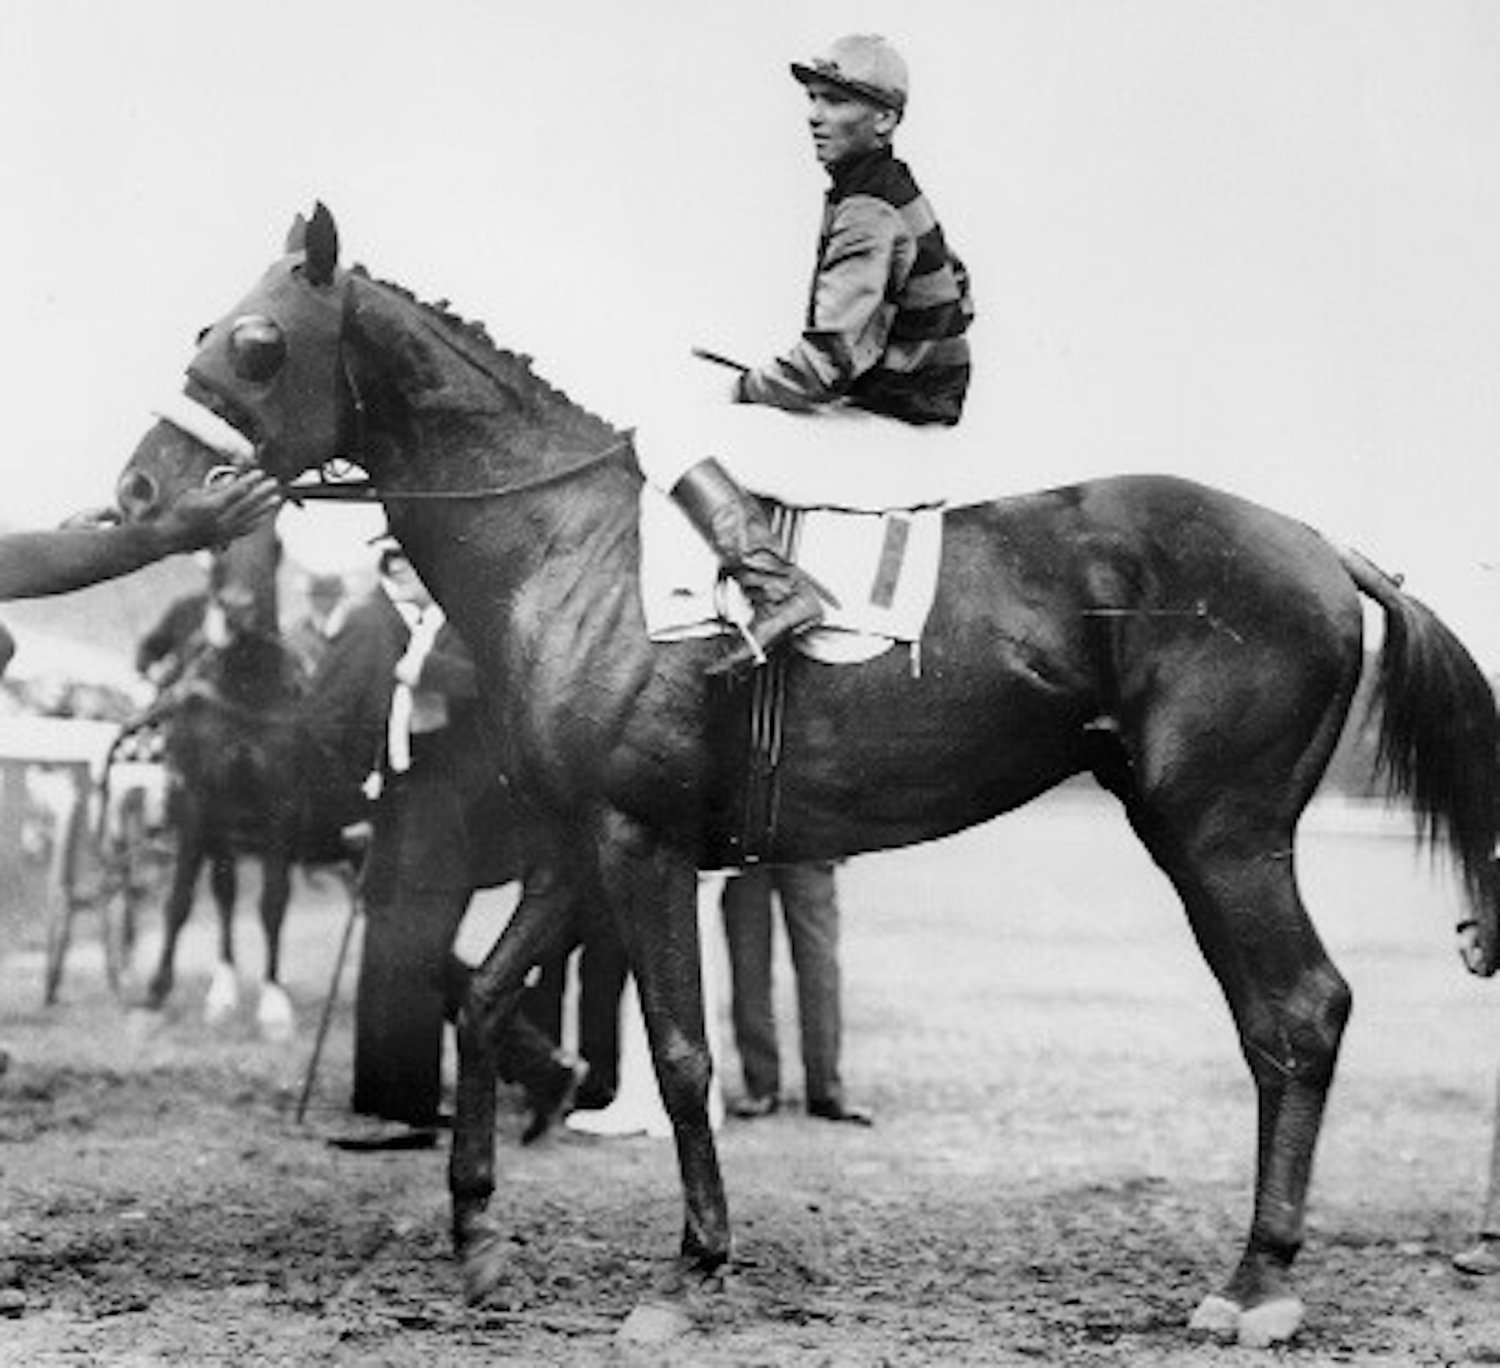 Sir Barton, ridden by jockey Johnny Loftus, won the Kentucky Derby, the Preakness Stakes and the Belmont Stakes in 1919, making him horseracing’s first Triple Crown winner.